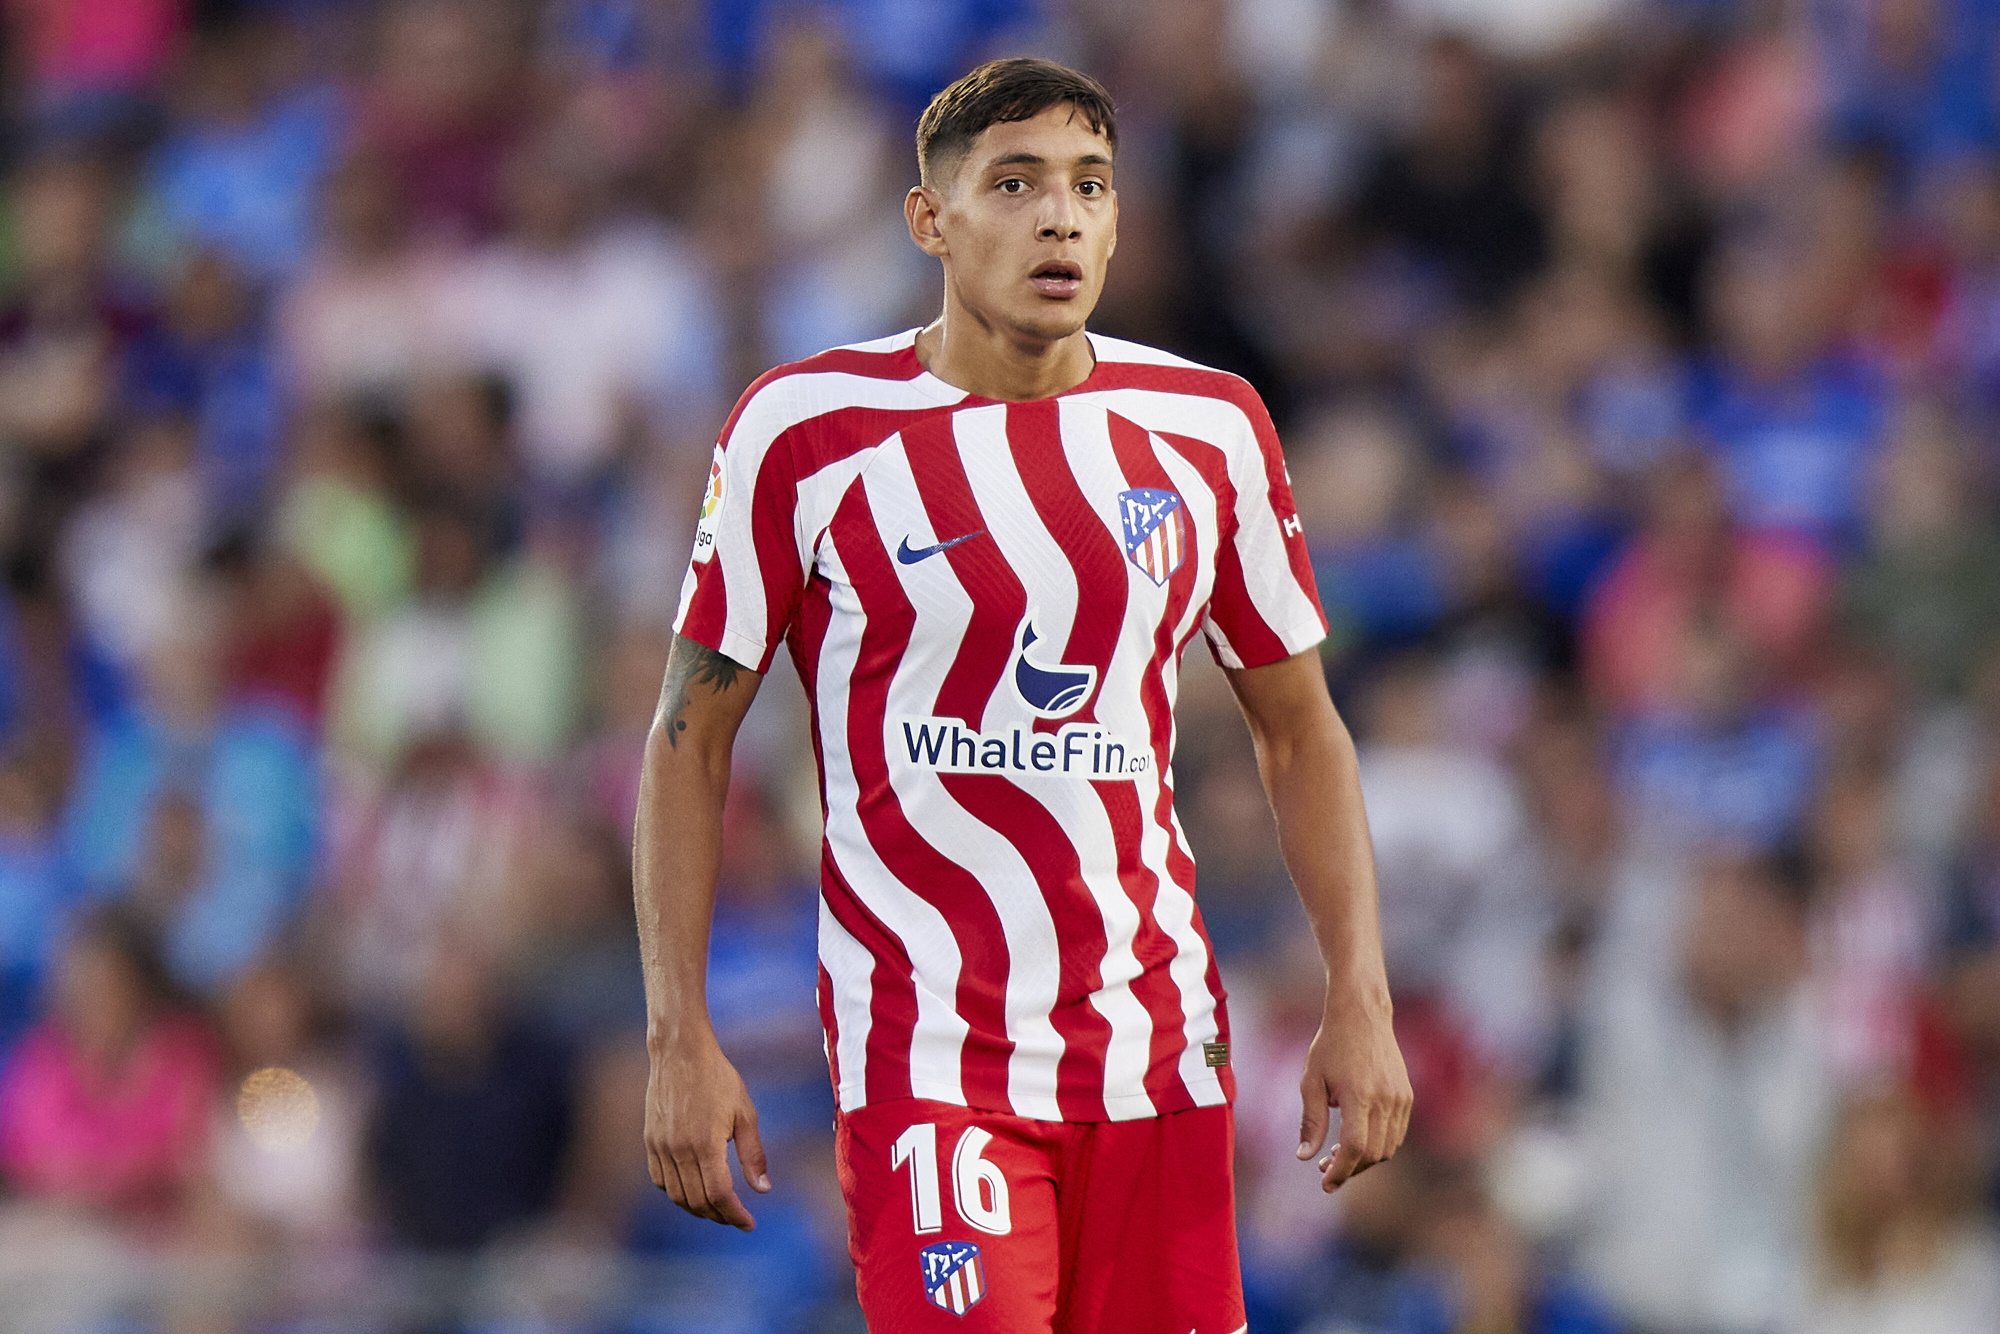 Atletico Madrid star Nahuel Molina – ‘Coming to Madrid has changed me for the better’